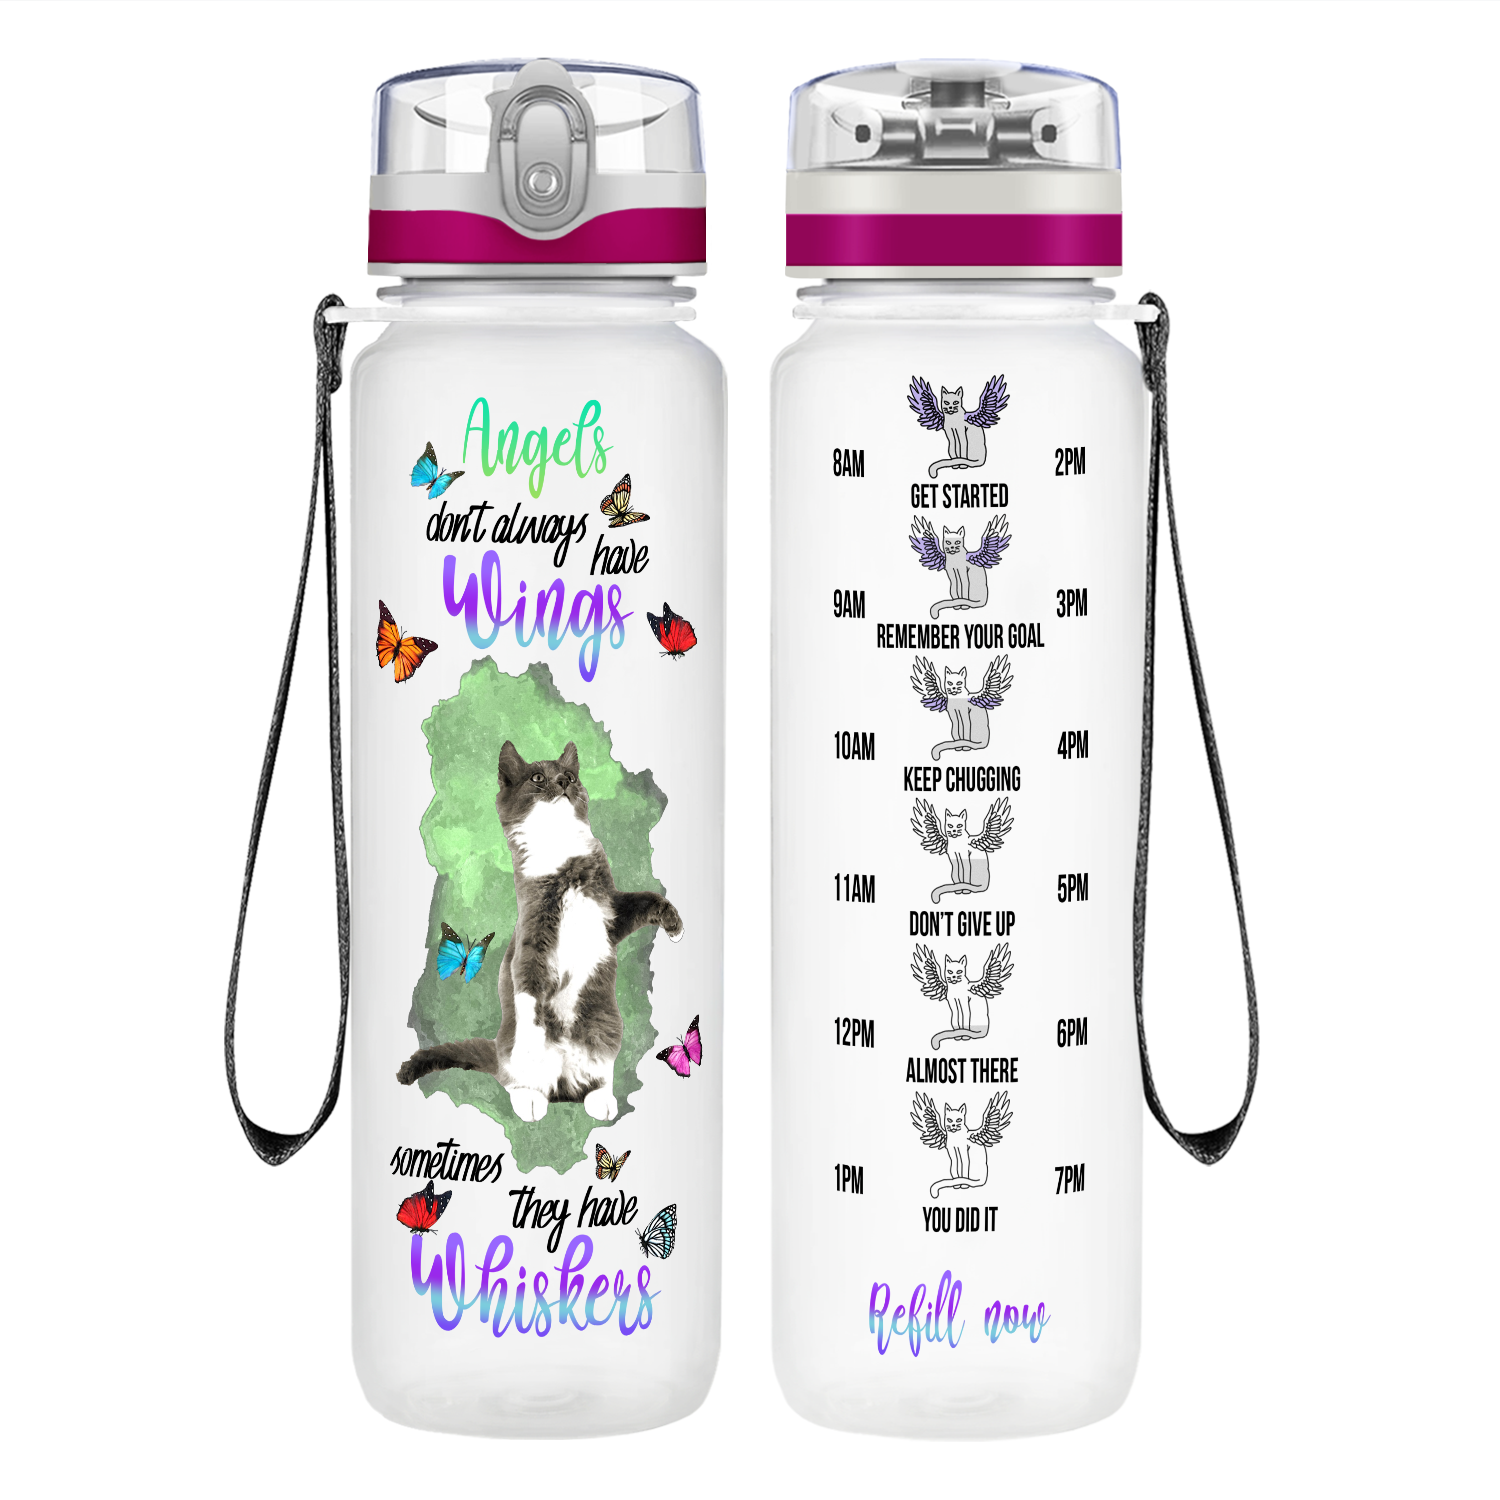 Angels Don't Always Have Wings on 32 oz Motivational Tracking Water Bottle